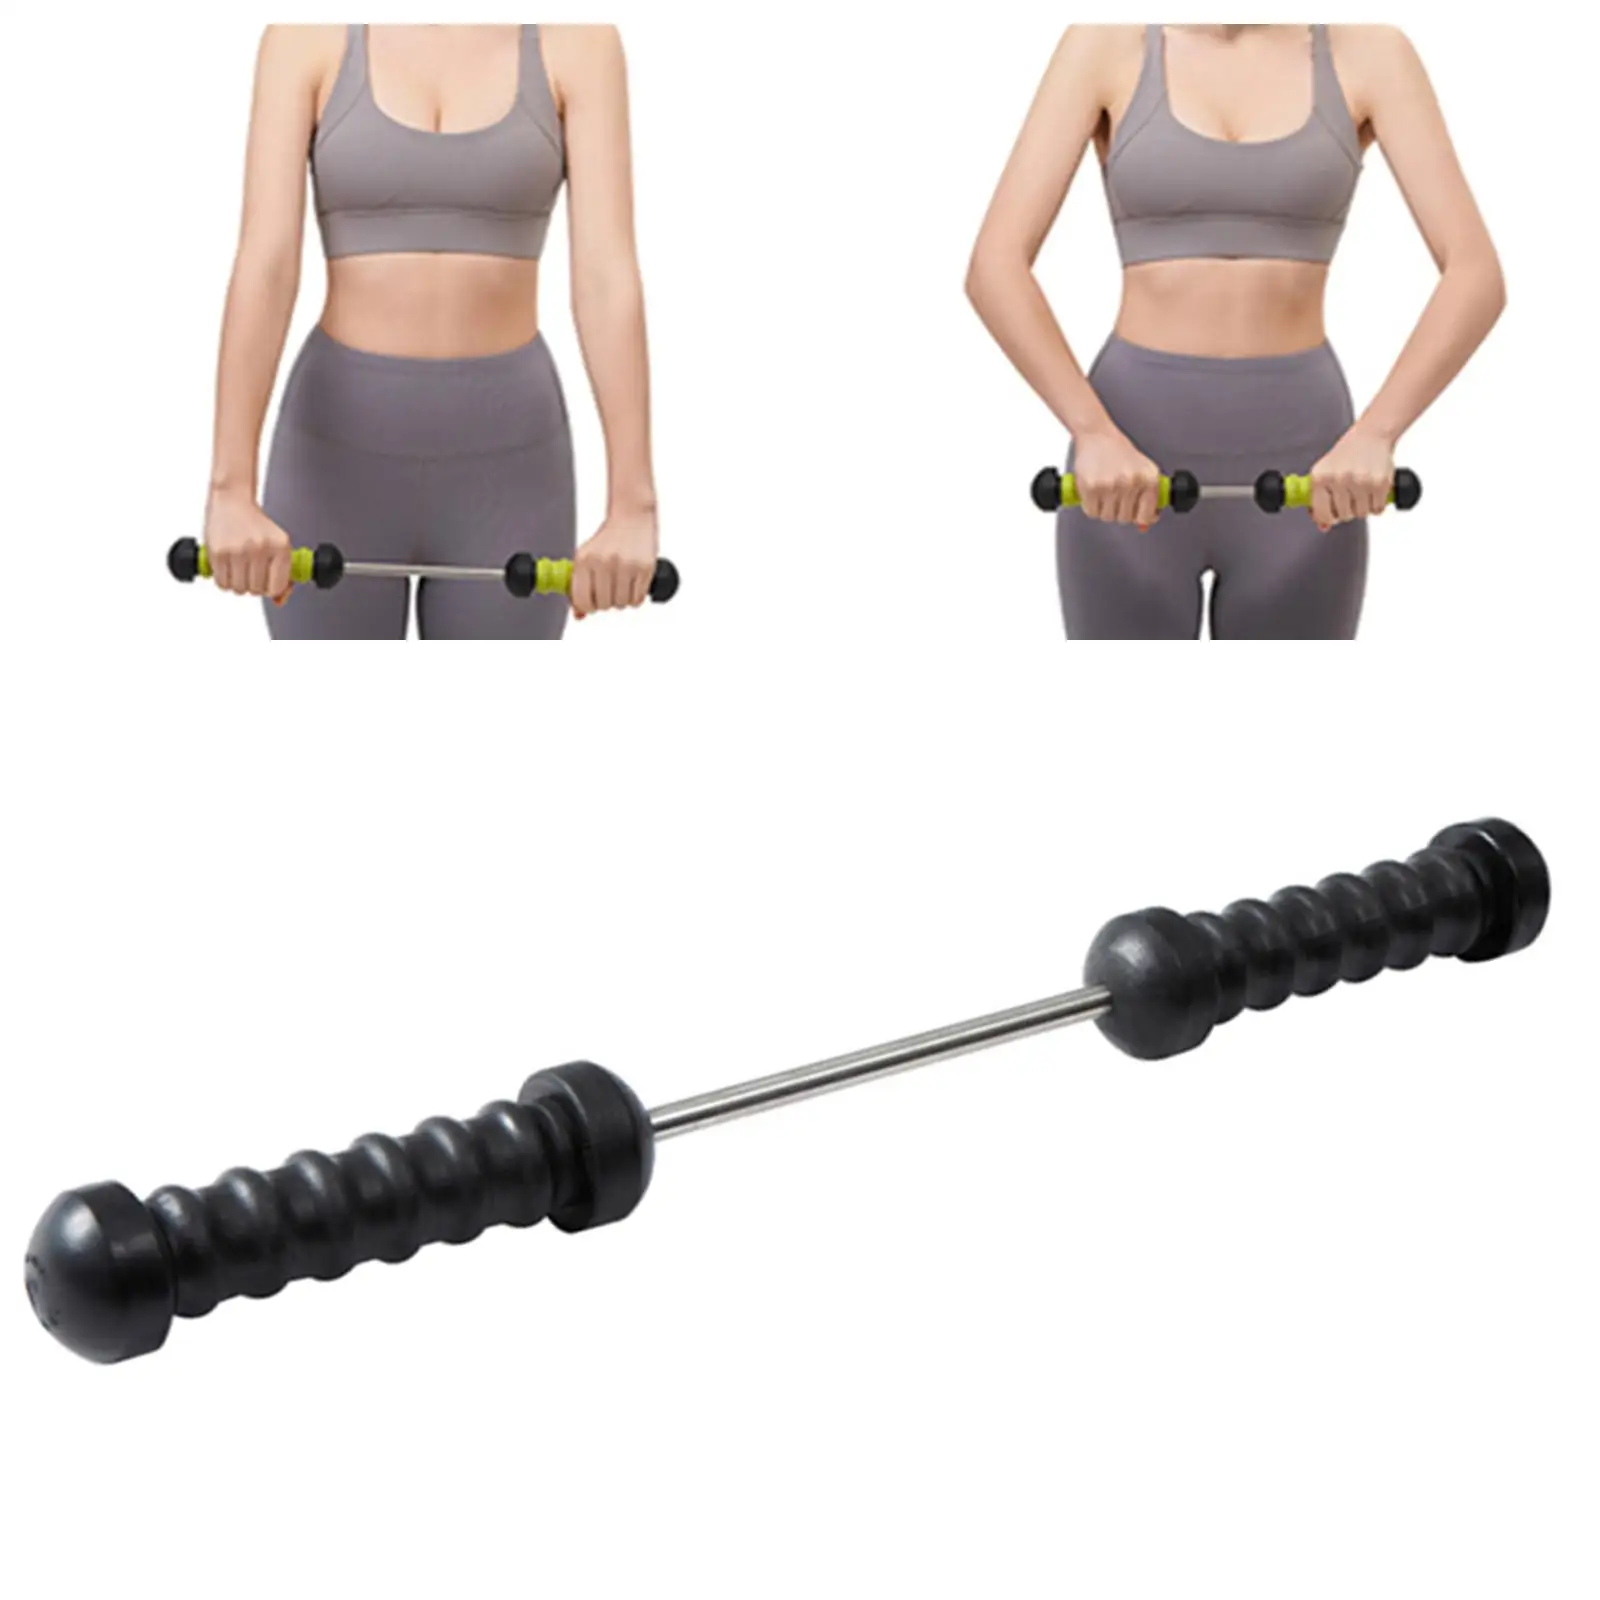 Arm Power Exerciser Home Gym Women Men Resistance Exercise System Bands